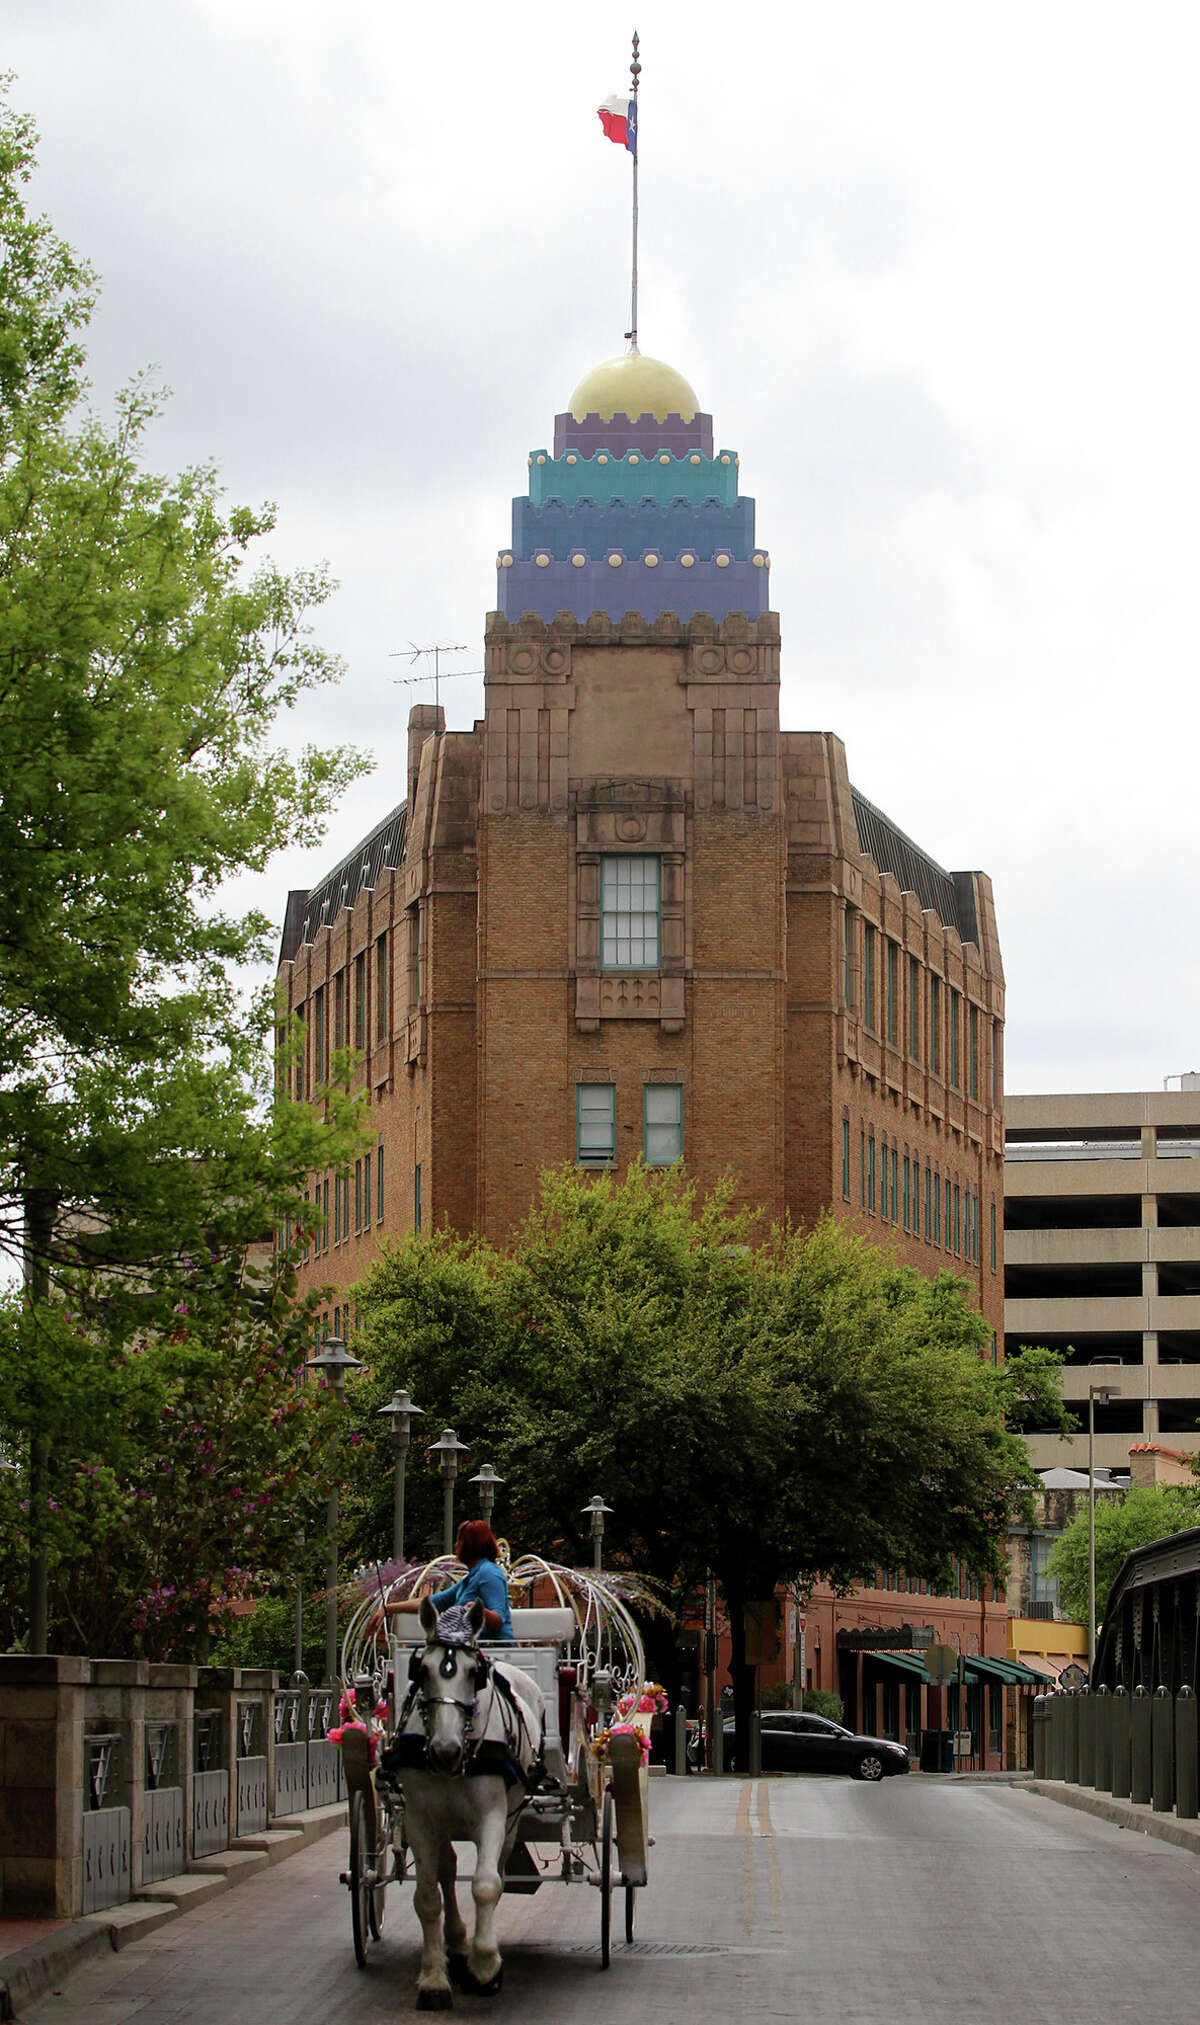 This is the Casino Club Building in downtown San Antonio. The building was completed in 1927 and became a distinctive landmark with its tiered dome.